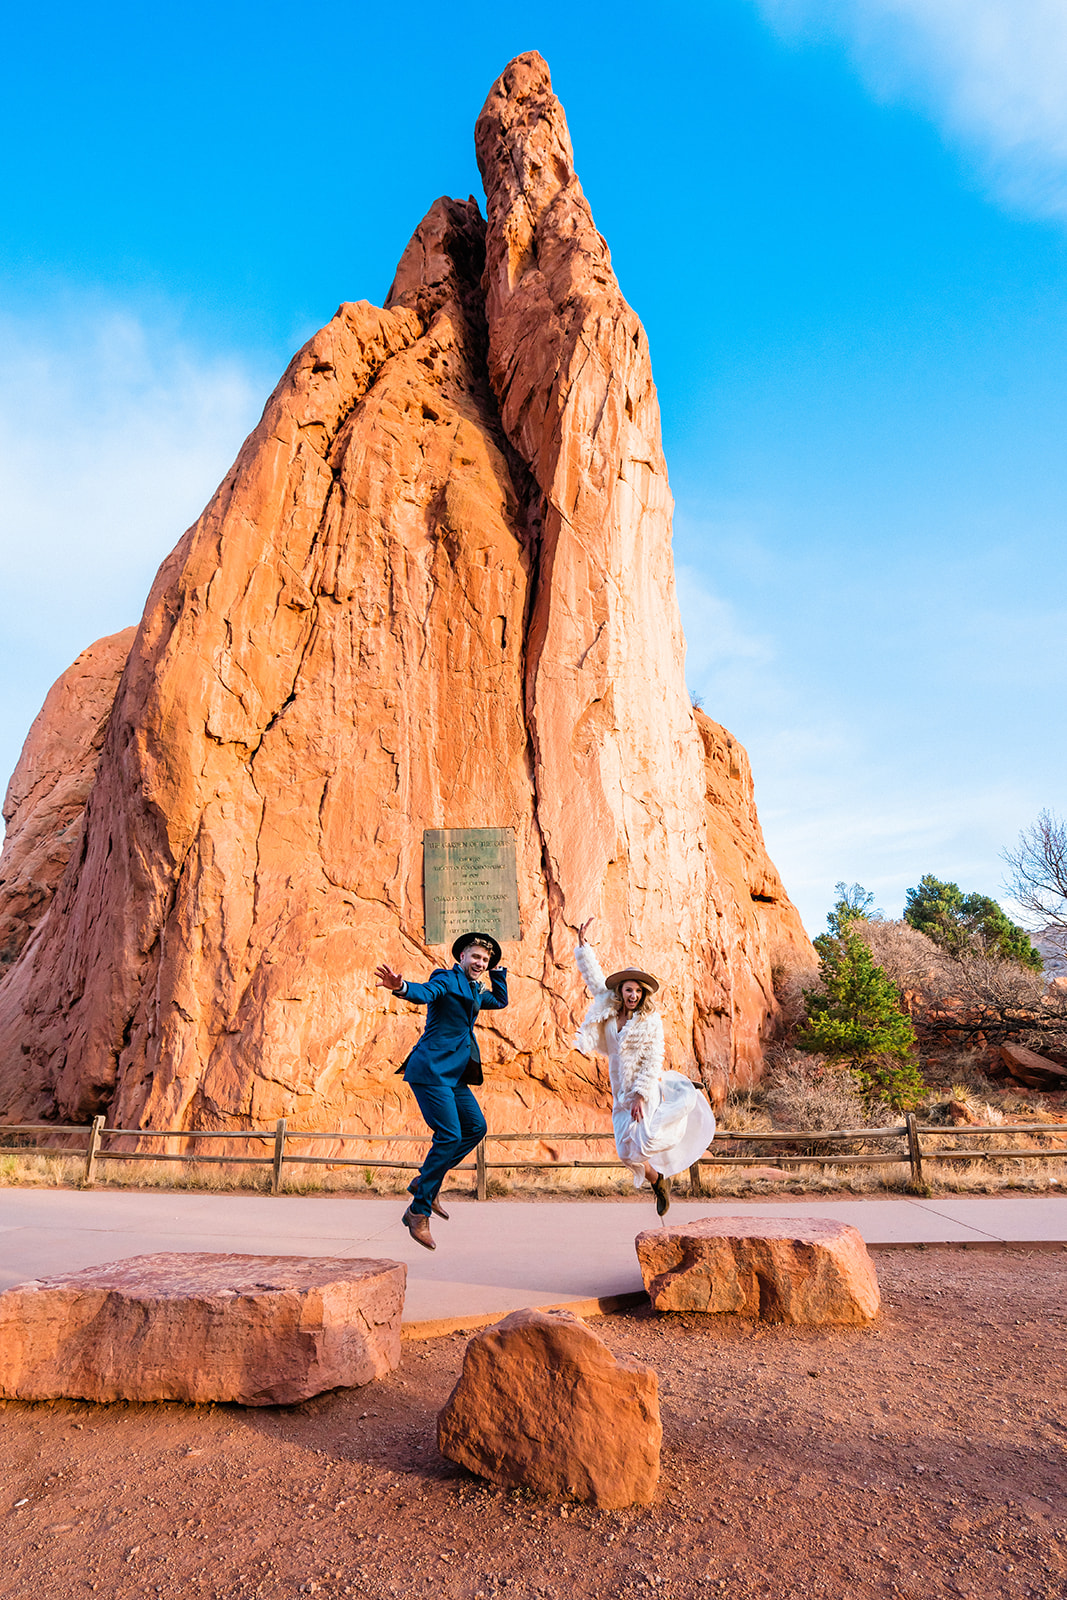 Newly engaged couple jumping in the air in frnot of bright red rocks